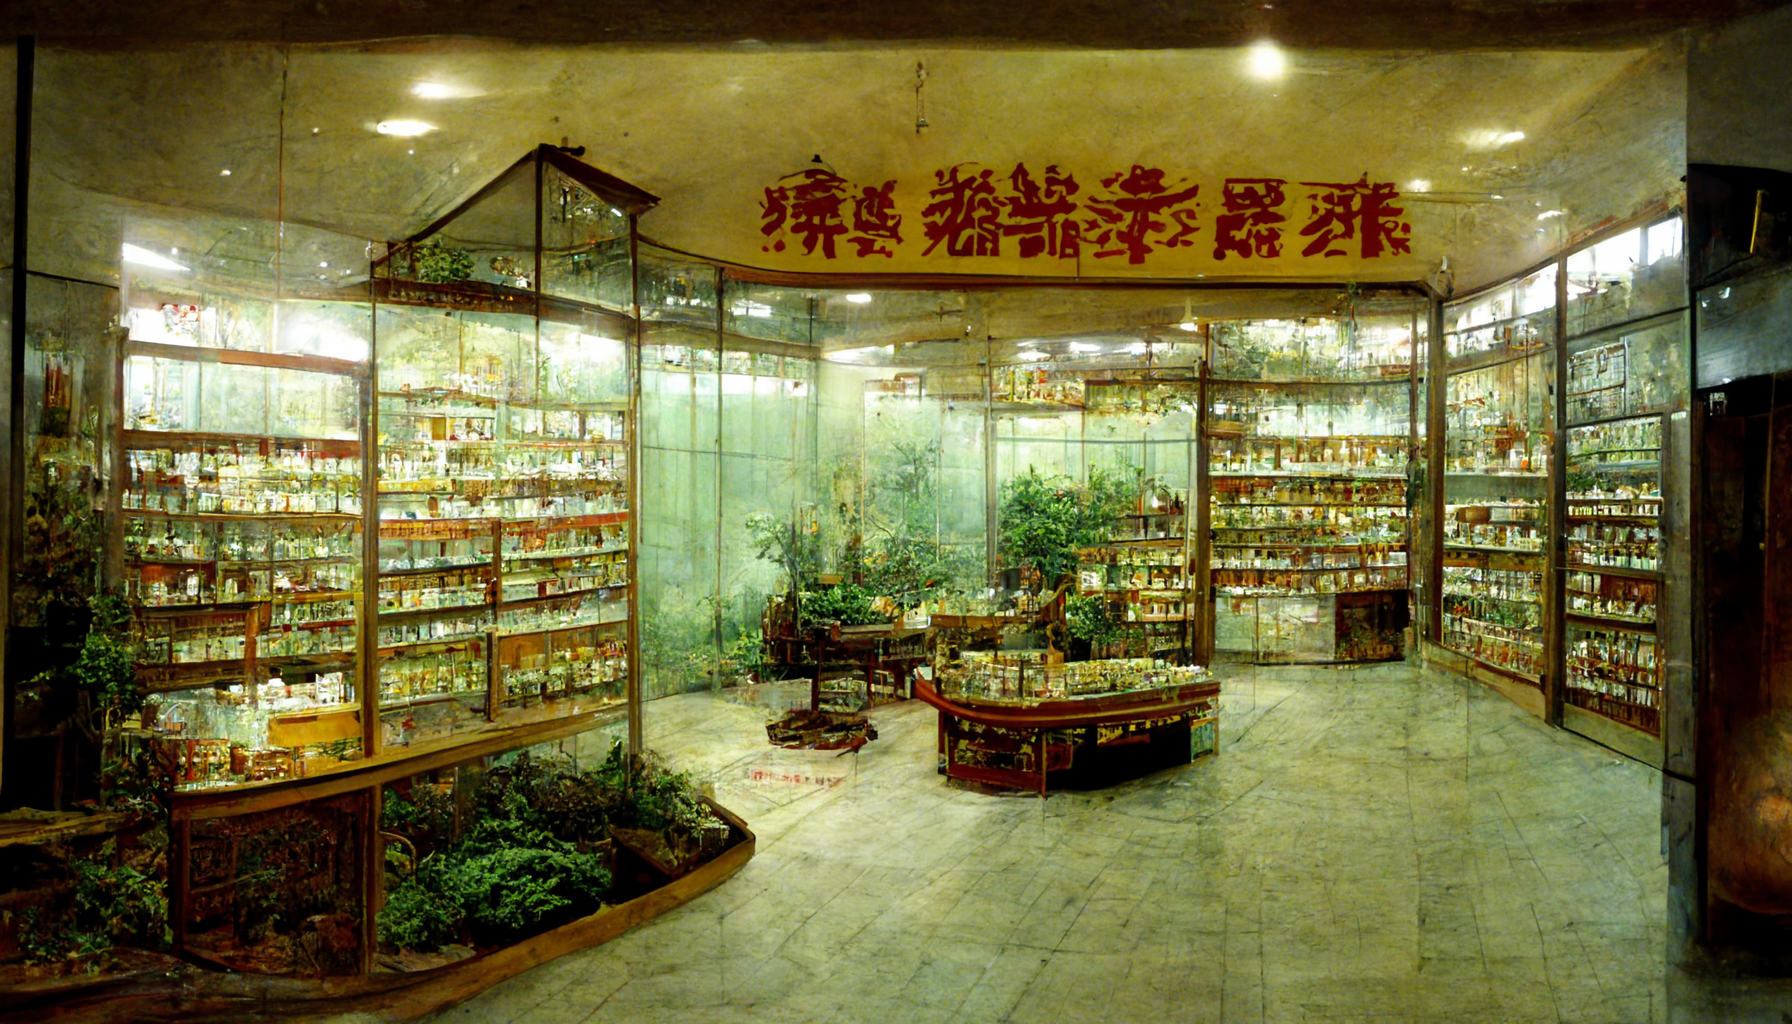 Shelves of packaged medicine, and growing green plants. There is a sign above the shelves written in undecipherable, incorrect chinese